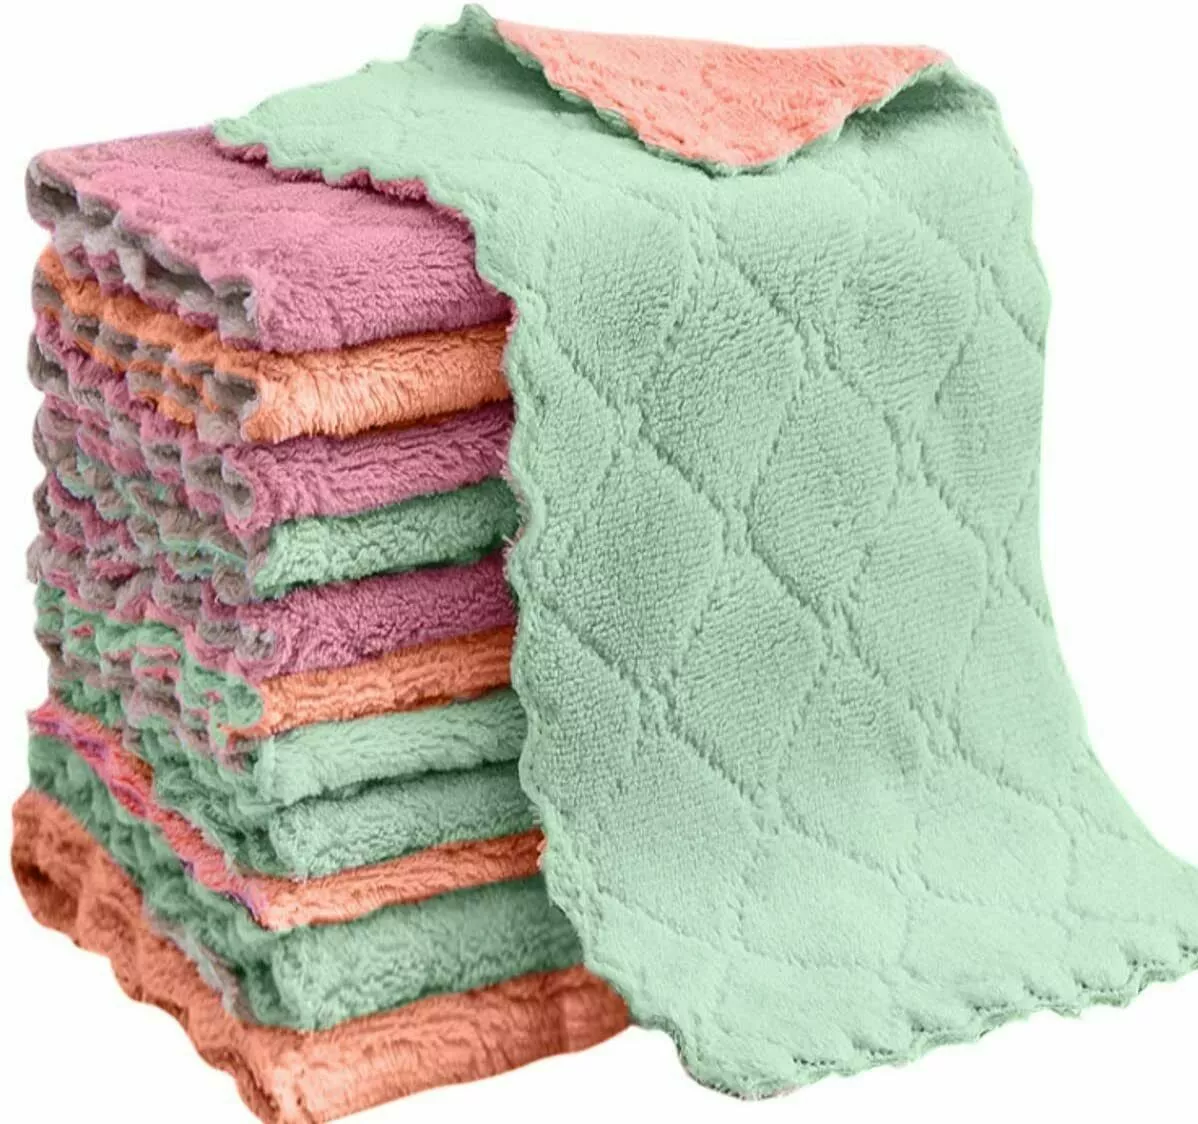 10 Pack Kitchen Cloth Dish Towels, Microfiber Cleaning Cloth